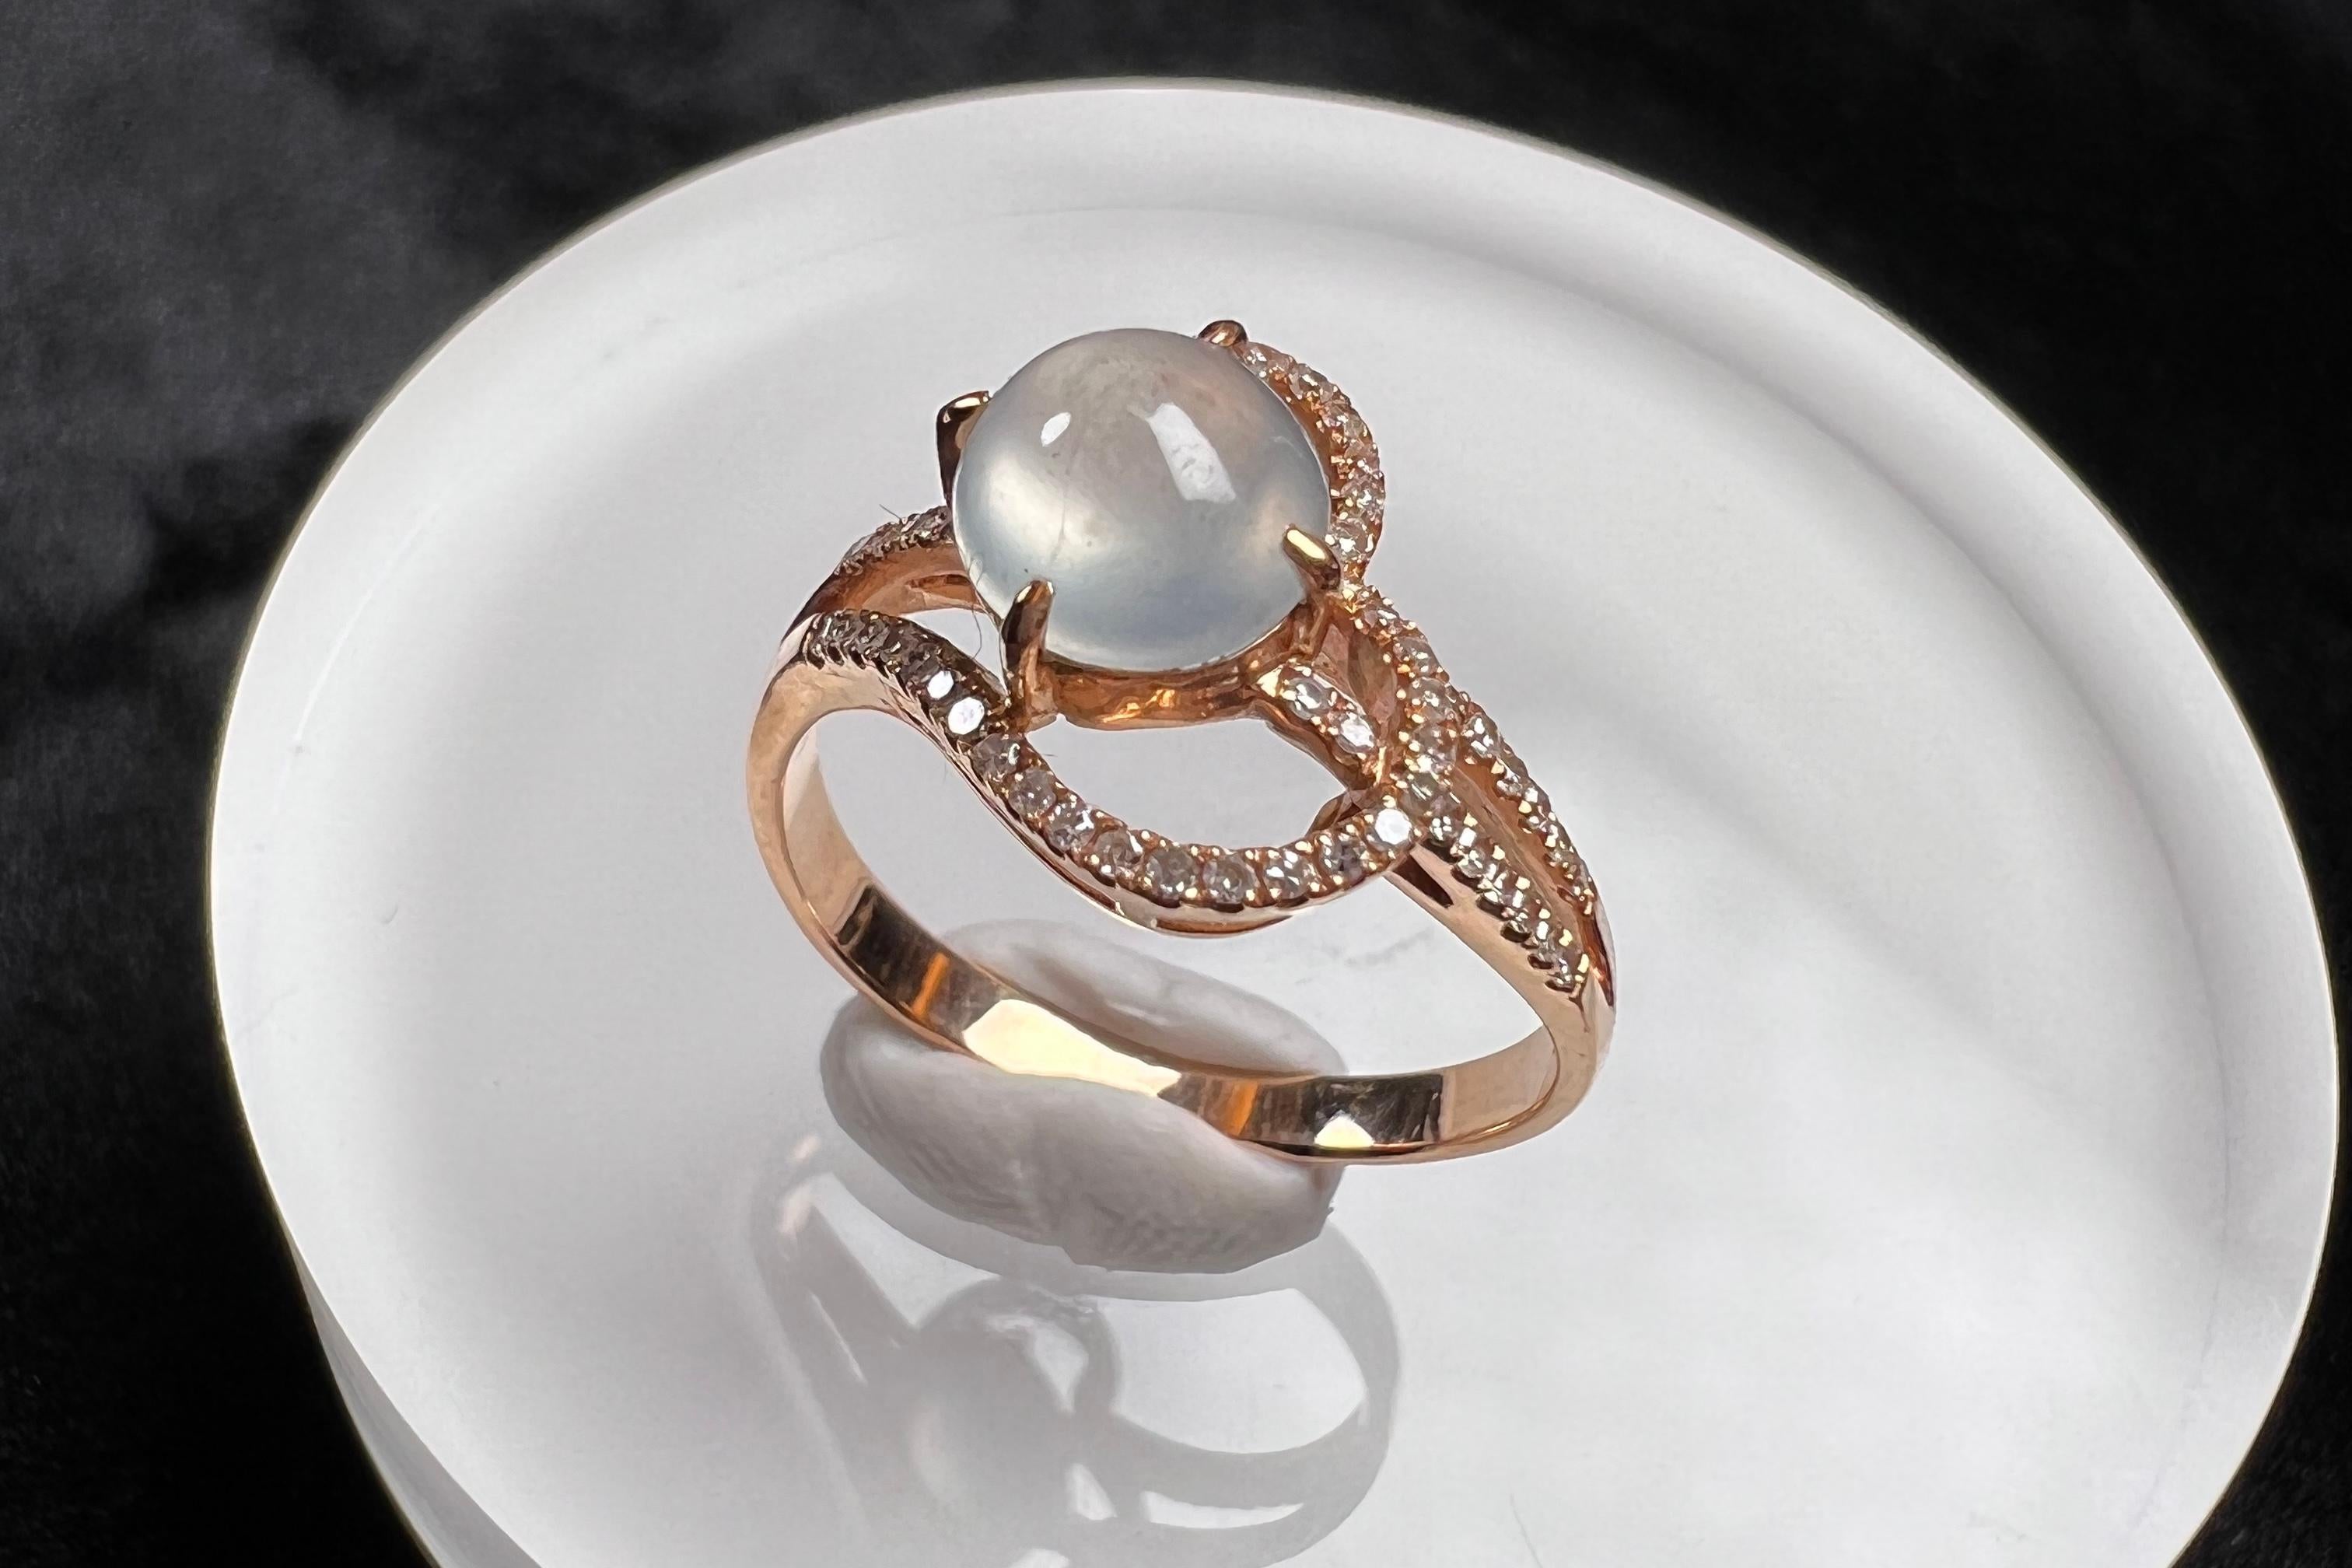 18K Rose Gold Icy Jadeite Diamond Ring, Engagement Ring

Total weight (approx.): 2.9g
Main stone(jadeite) measurement (approx.): 7.2*6.6mm

This ring is resizable.
Get in touch with us to know more details and your shipping options.

The 18K Rose